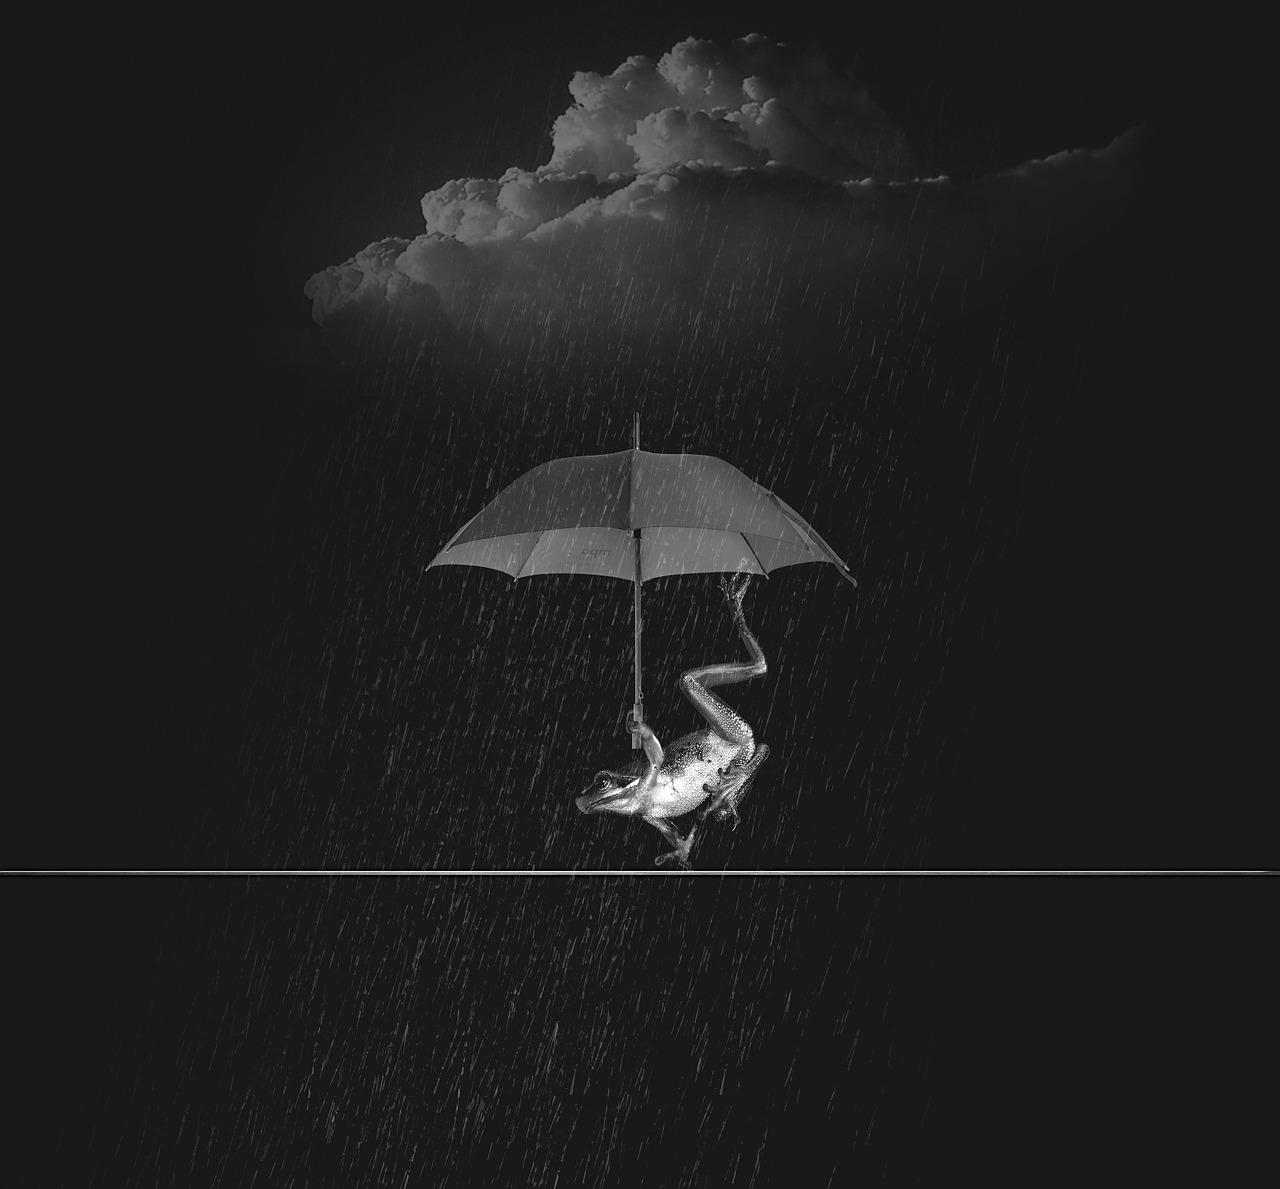 a woman sitting under an umbrella in the rain, a black and white photo, unsplash contest winner, conceptual art, alex andreev, amoled wallpaper, attached to wires. dark, water manipulation photoshop